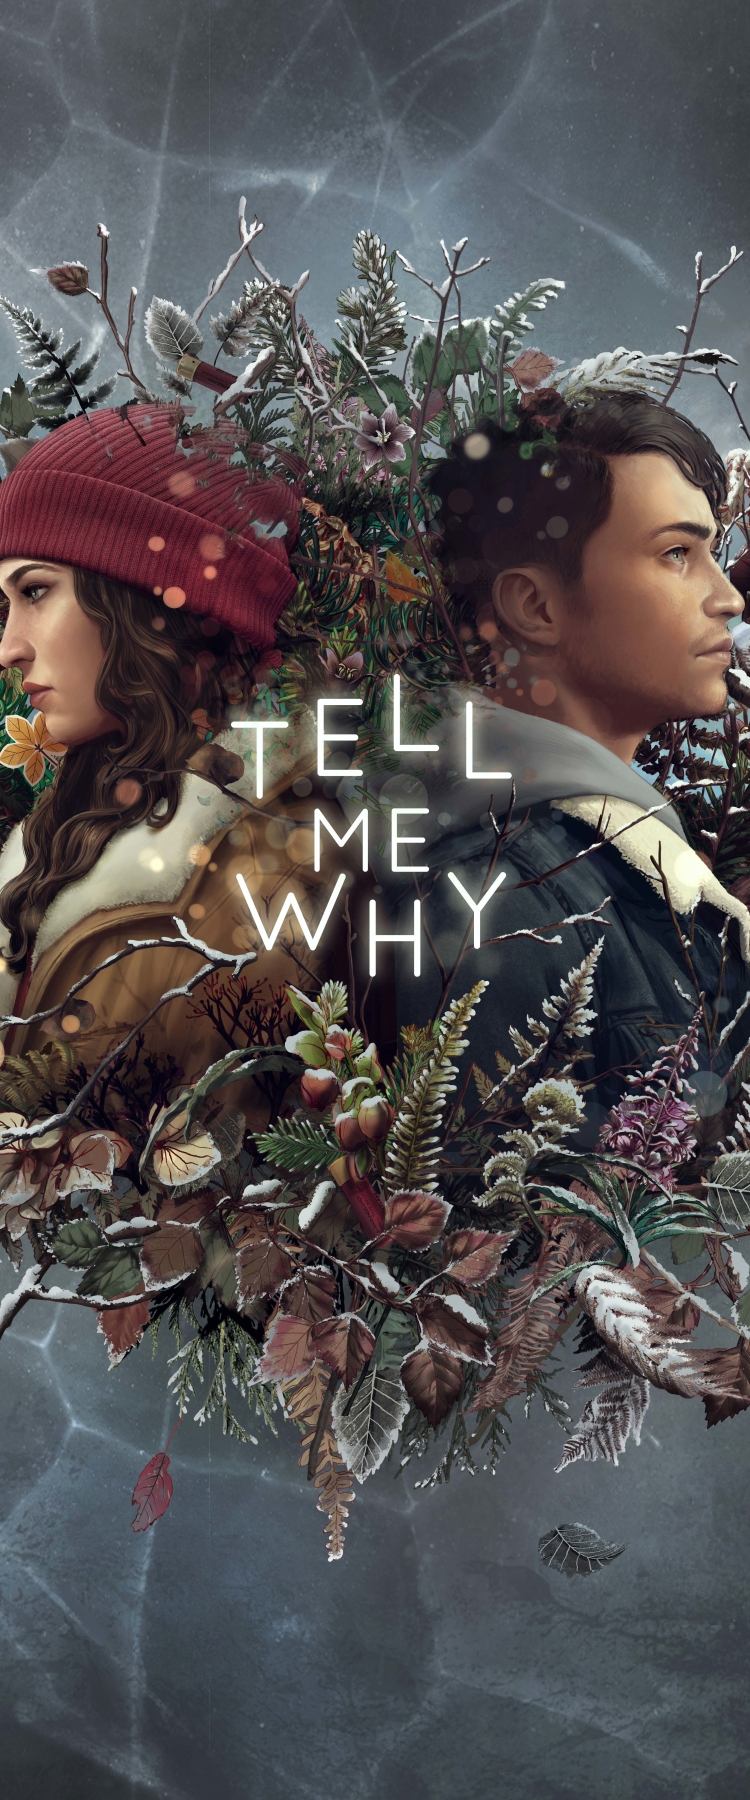 download tell me why game ps4